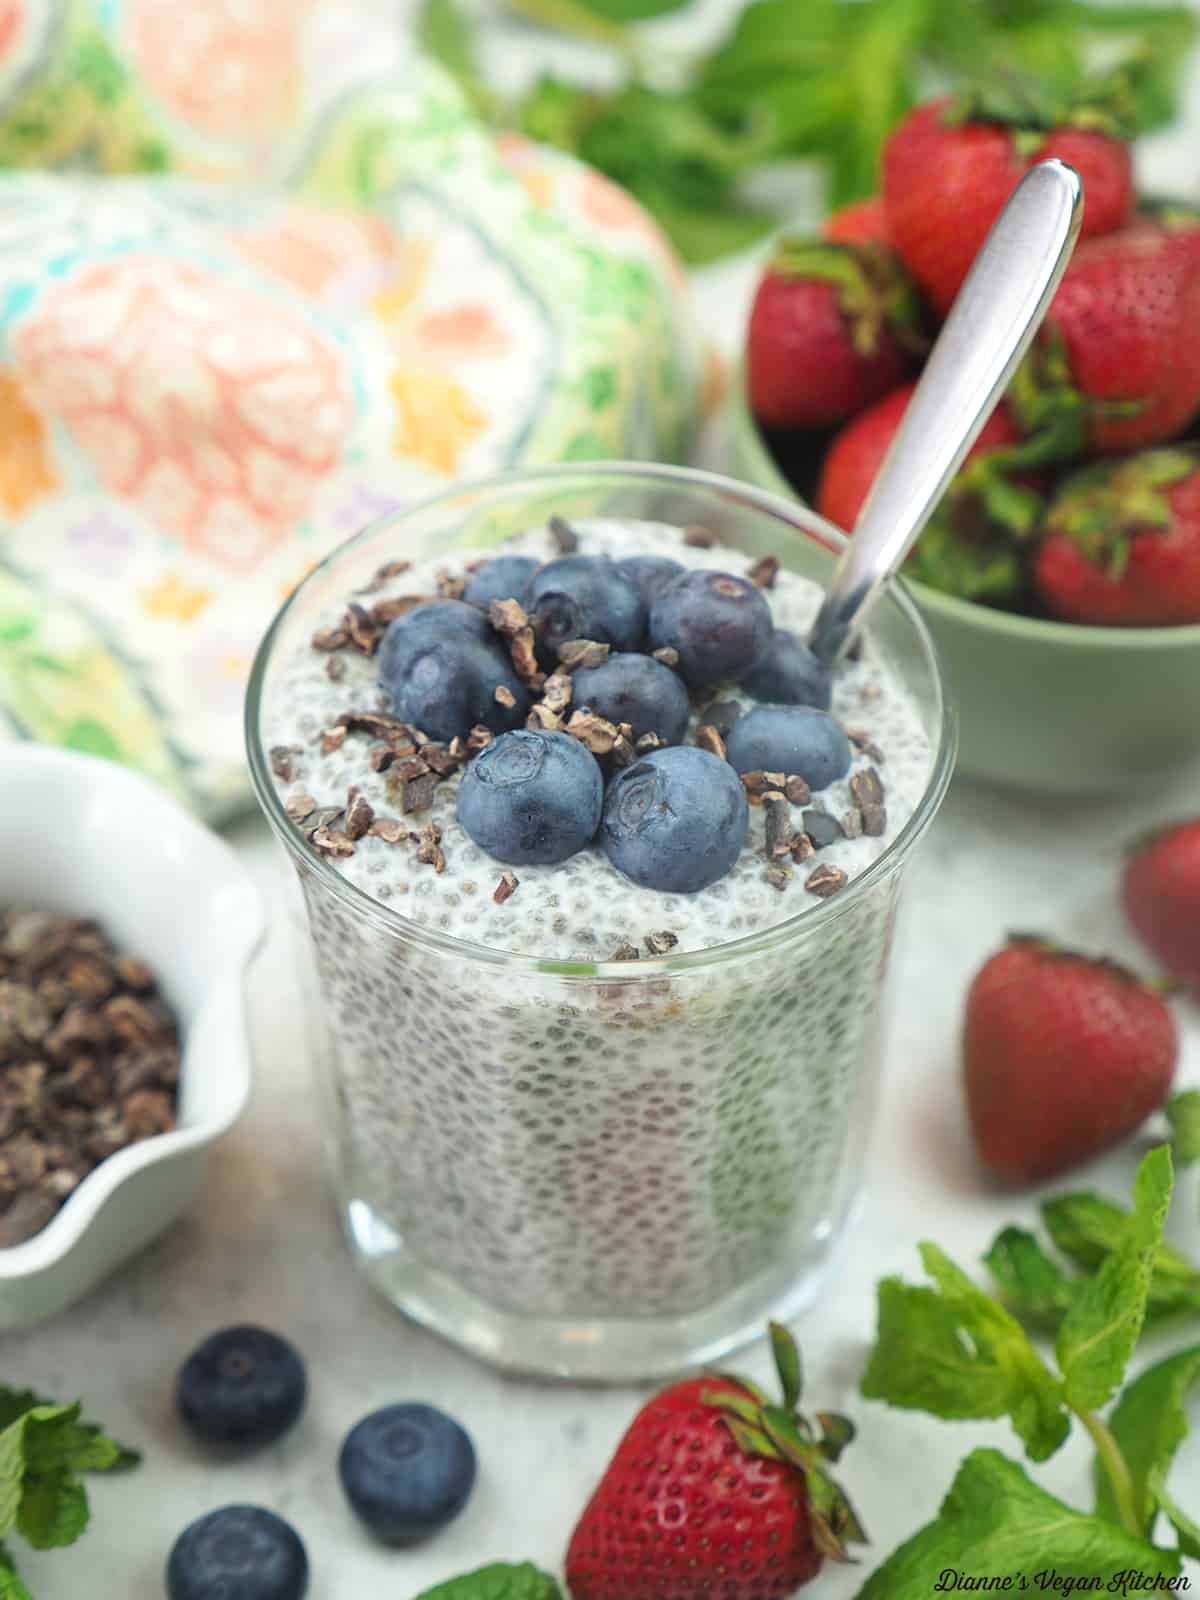 Blueberry Chia Pudding with a spoon, a bowl of strawberries, and a bowl of cacao nibs